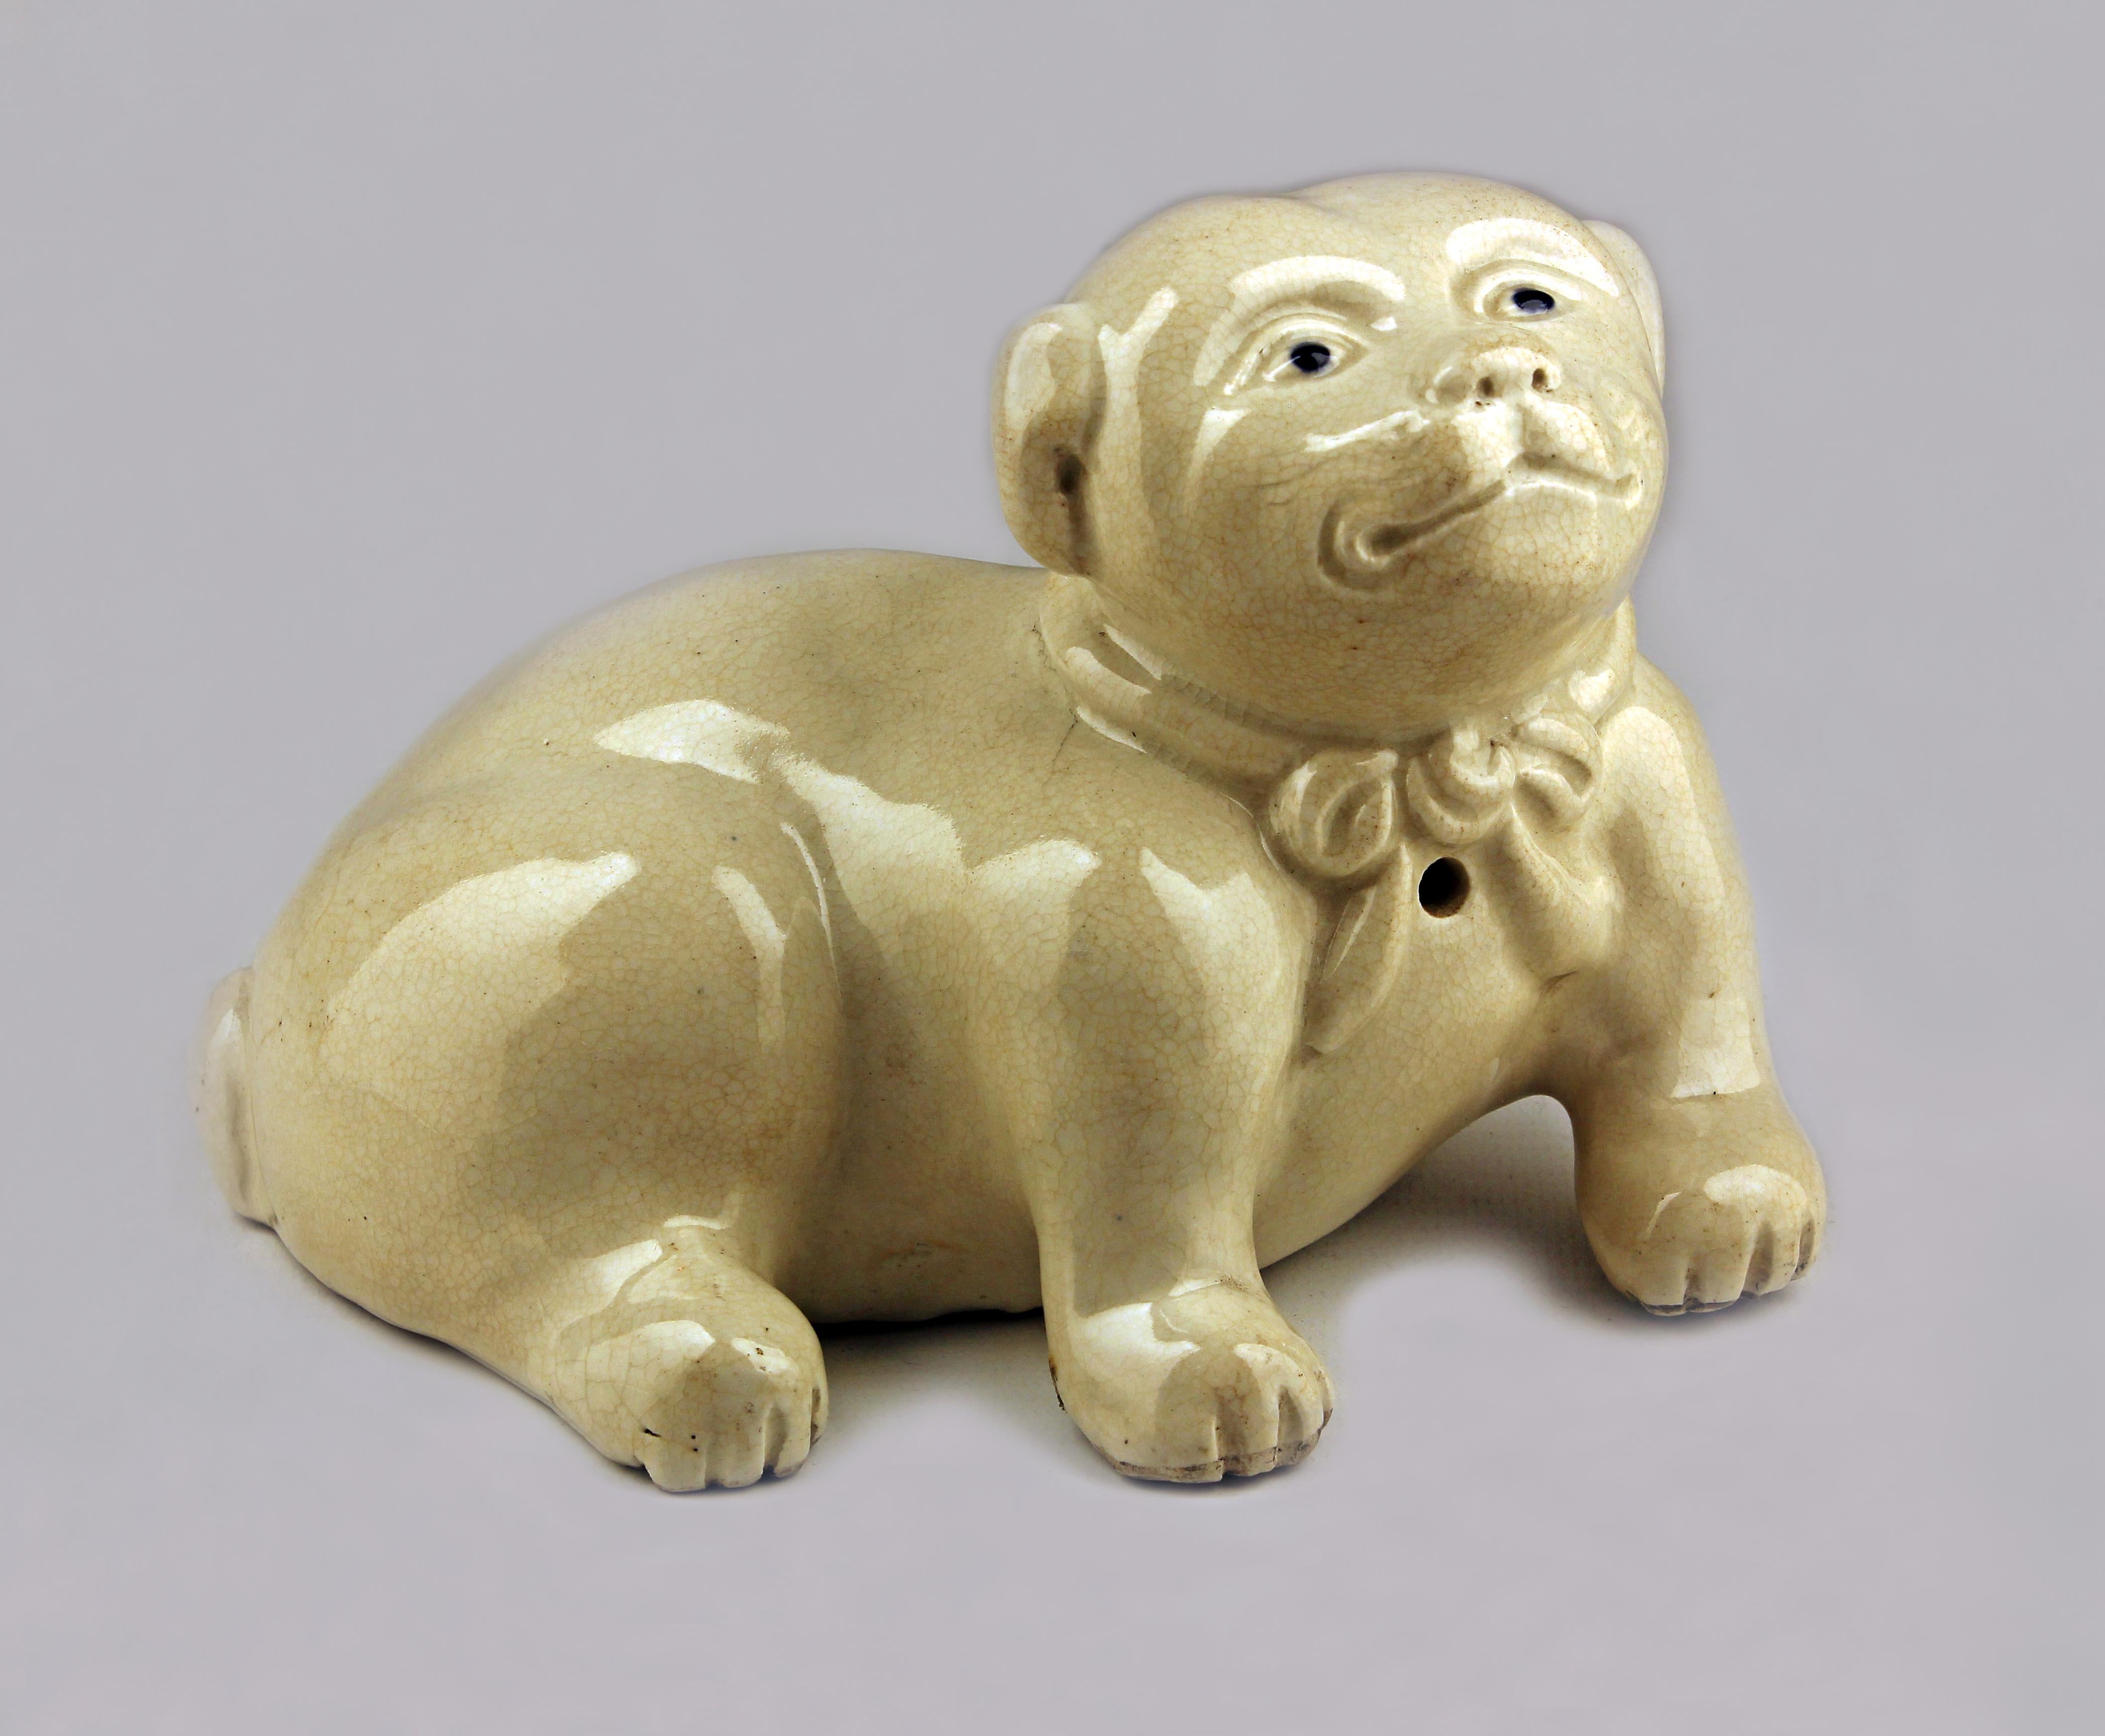 Late 18th century/Edo-Meiji period japanese glazed porcelain sculpture of a dog

By: unknown
Material: porcelain
Technique: molded, pressed, glazed
Dimensions: 5.5 in x 7.5 in x 5
Date: late 18th century
Style: Edo, Meiji
Place of origin: